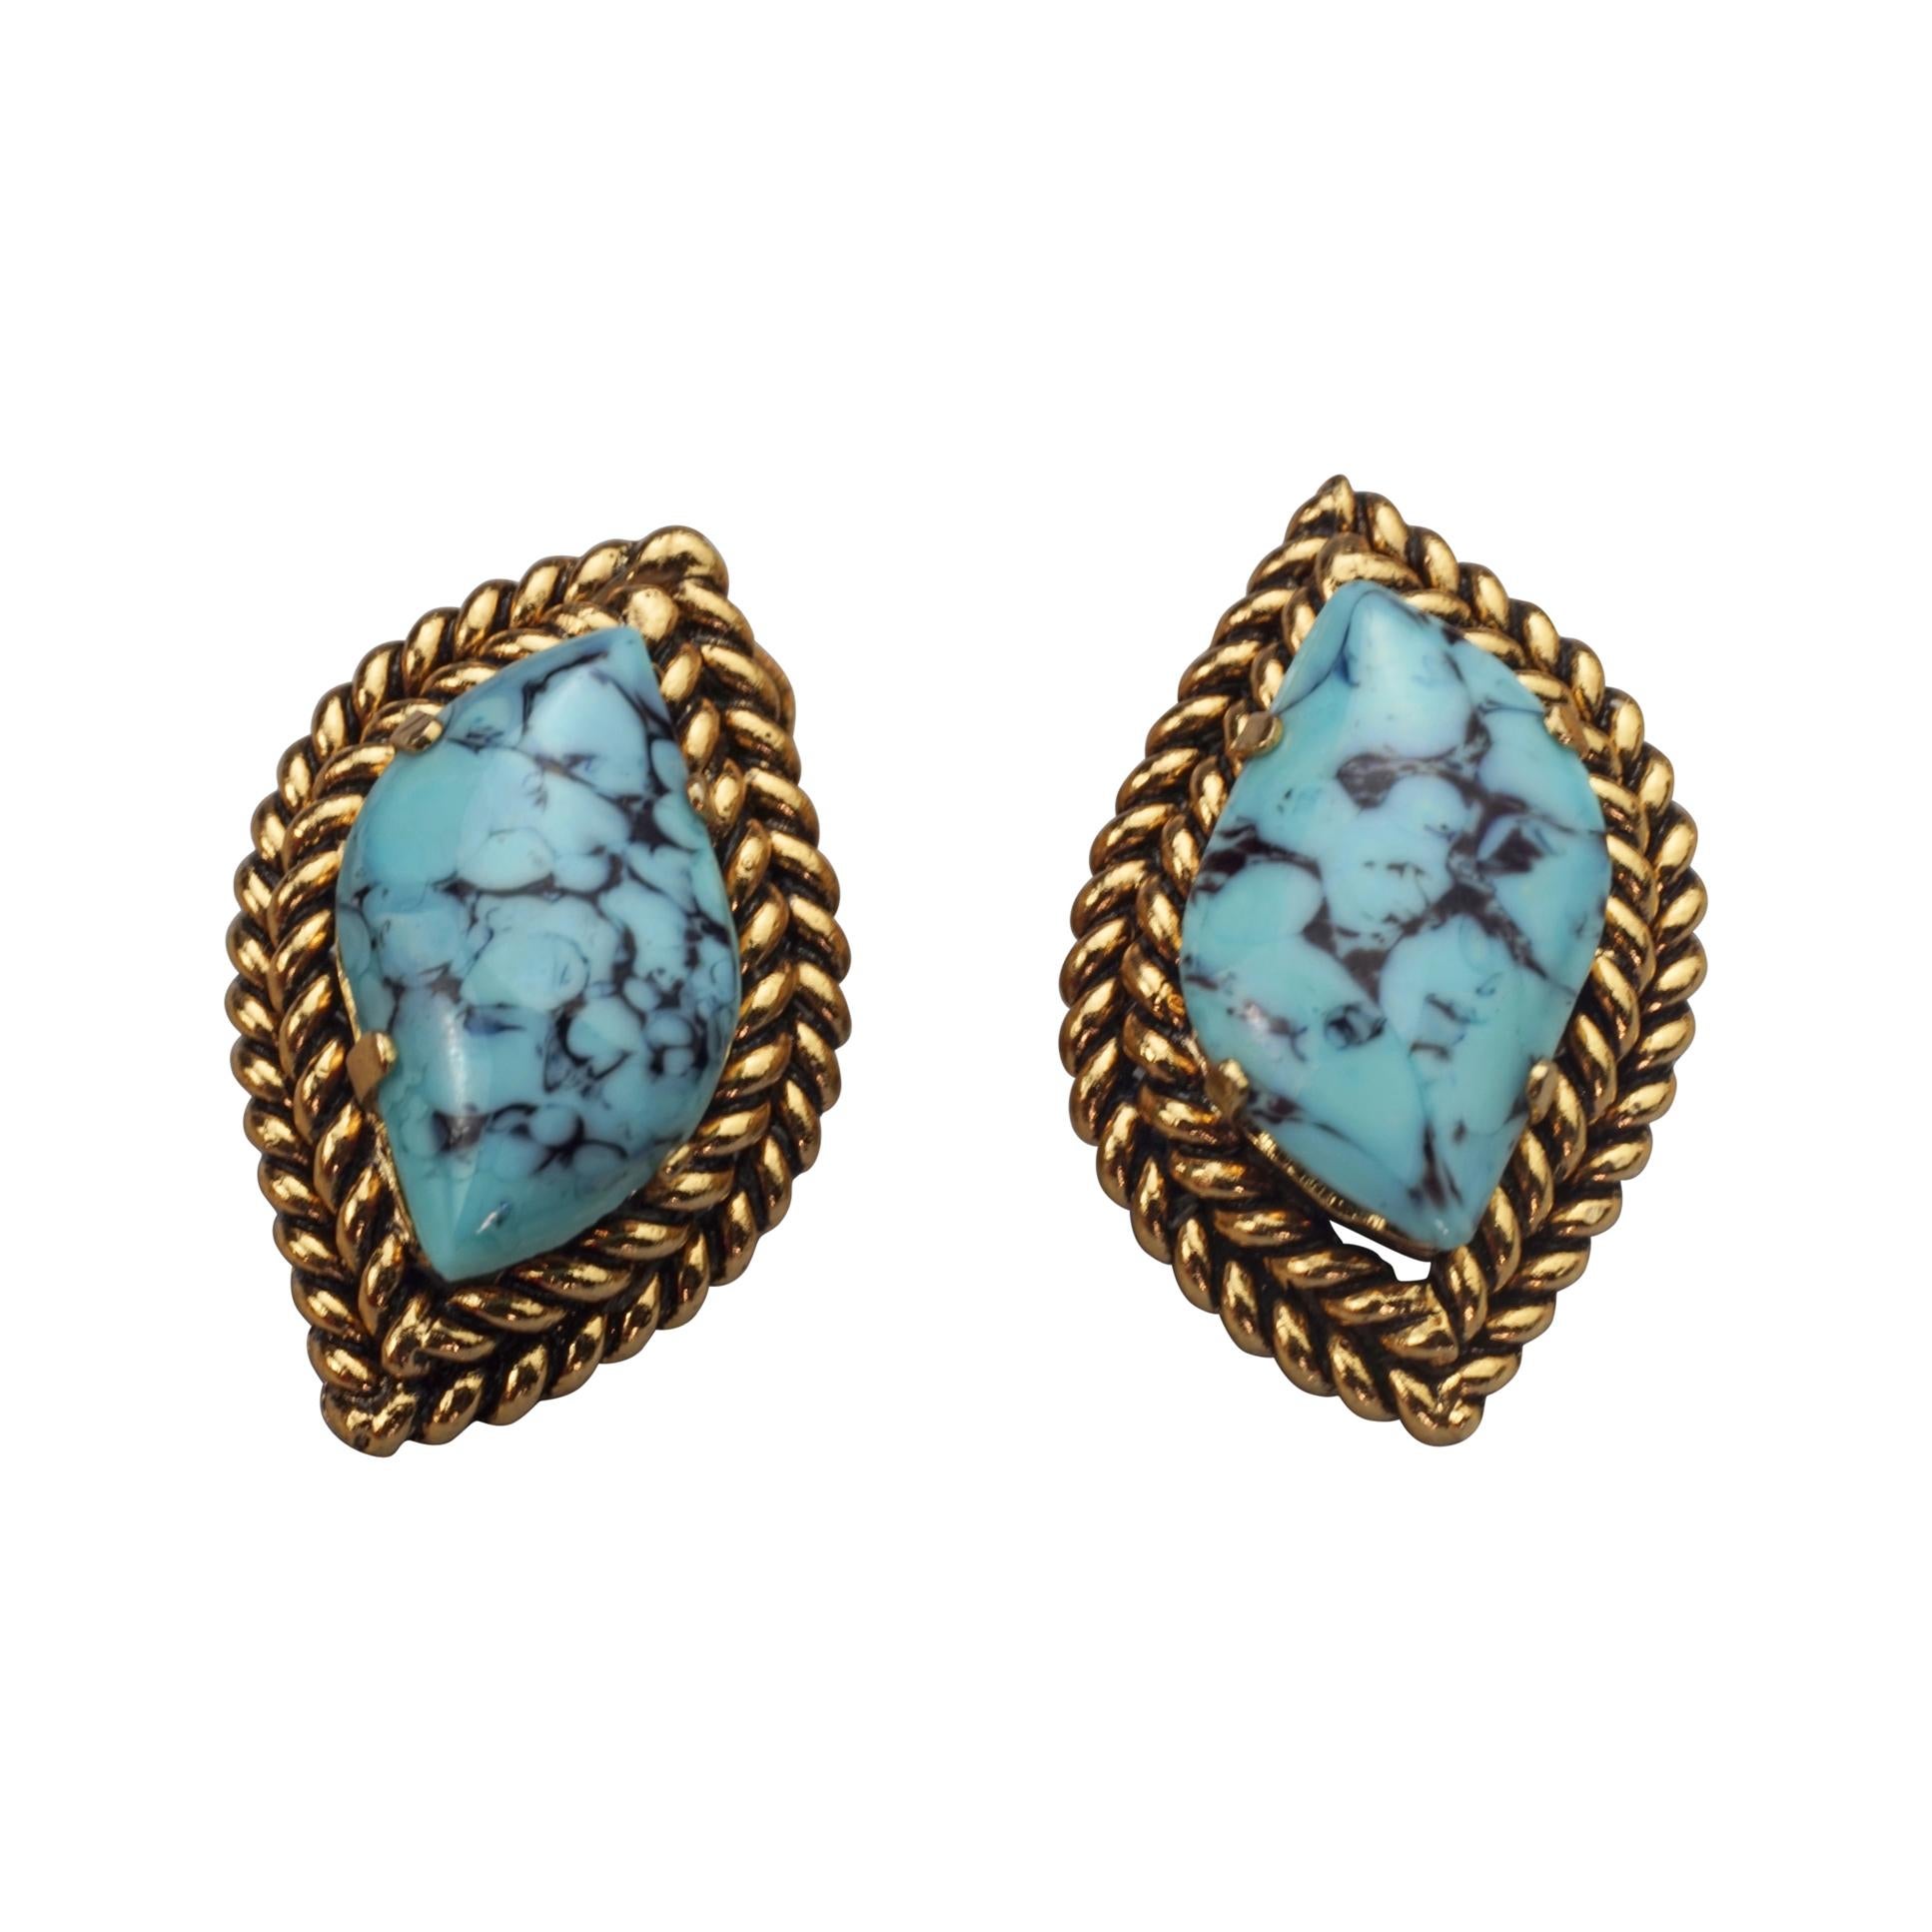 Vintage 1964 CHRISTIAN DIOR Turquoise Cabochon Braided Gilt Earrings